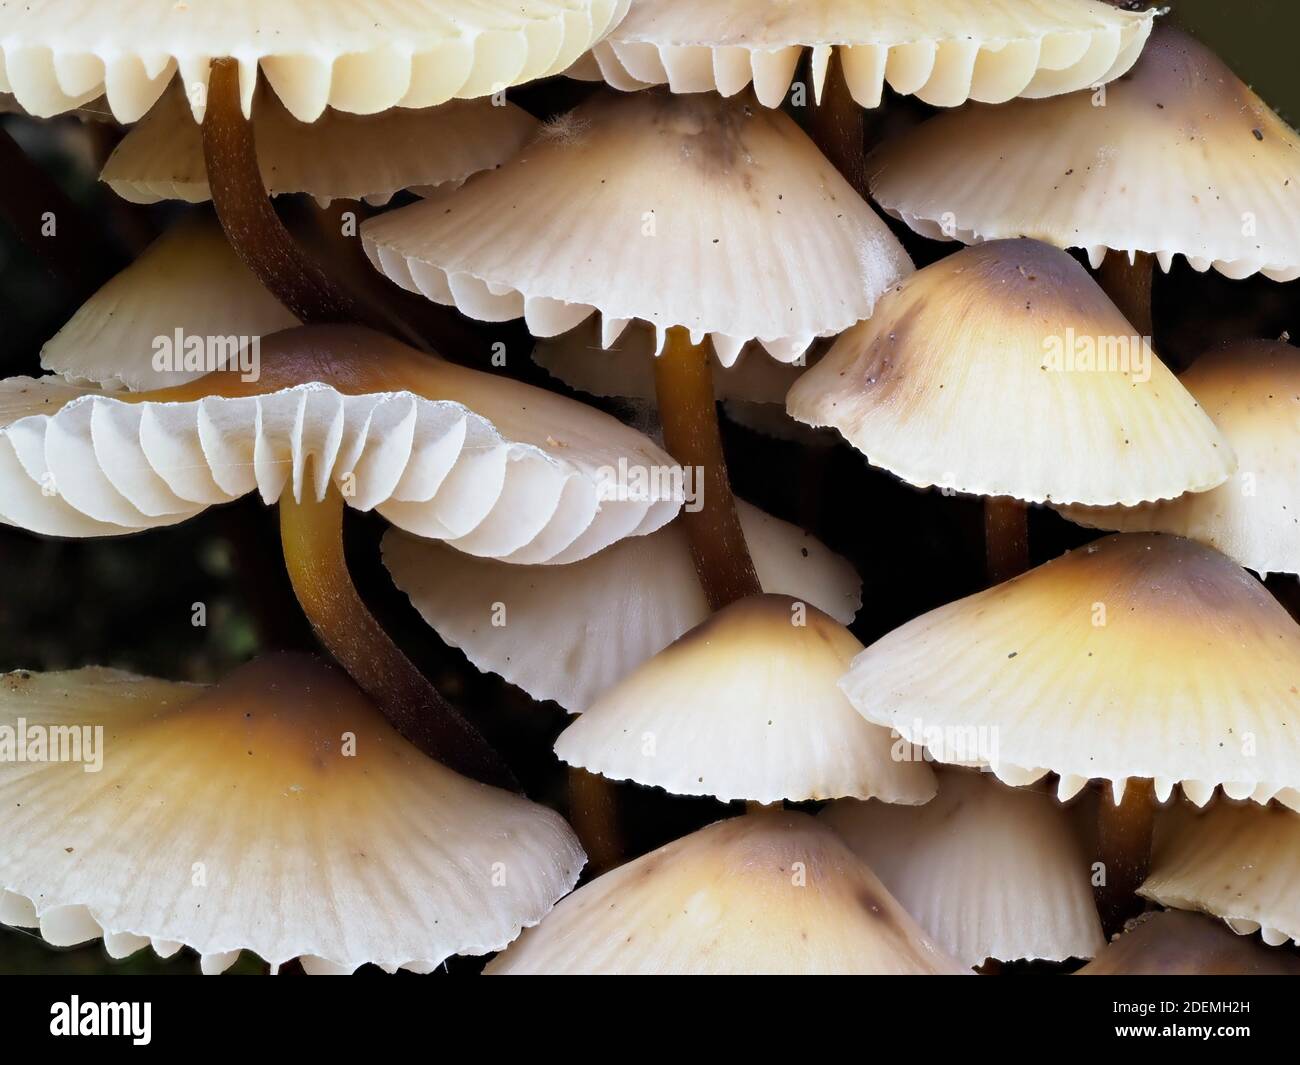 Clustered bonnet fungus (Mycena inclinata) close up showing gills underneath, East Blean Woodlands, Kent UK, stacked focus image Stock Photo